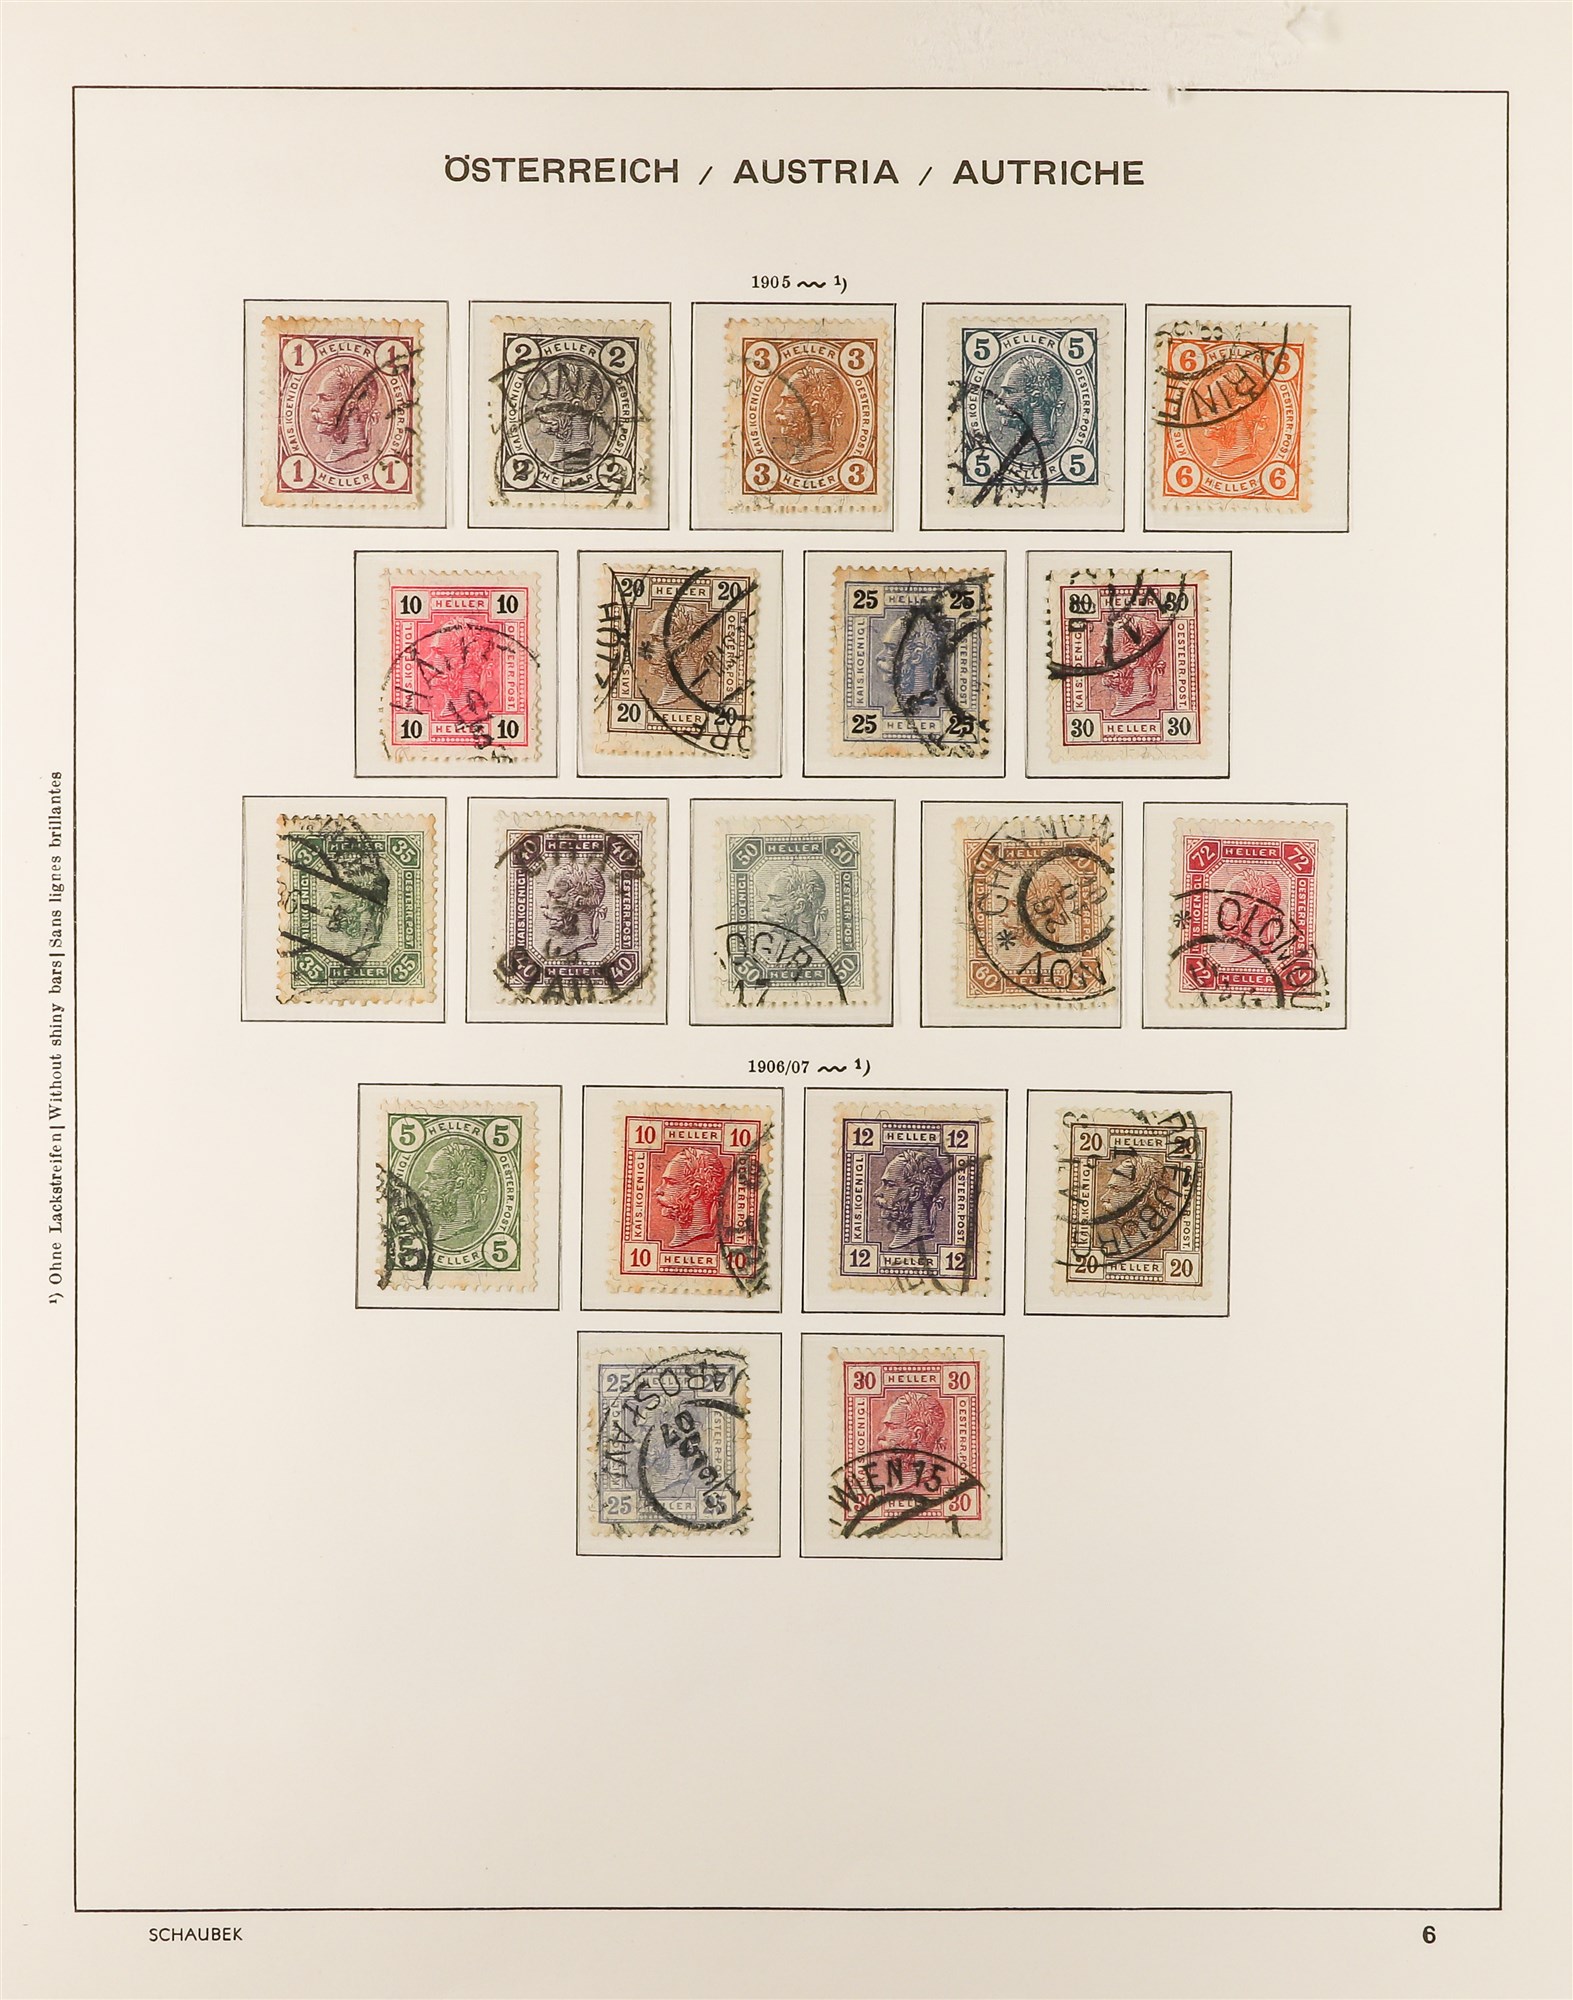 AUSTRIA 1850 - 1937 COLLECTION. of around 1000 mint & used stamps in Schaubek Austria hingeless - Image 10 of 29